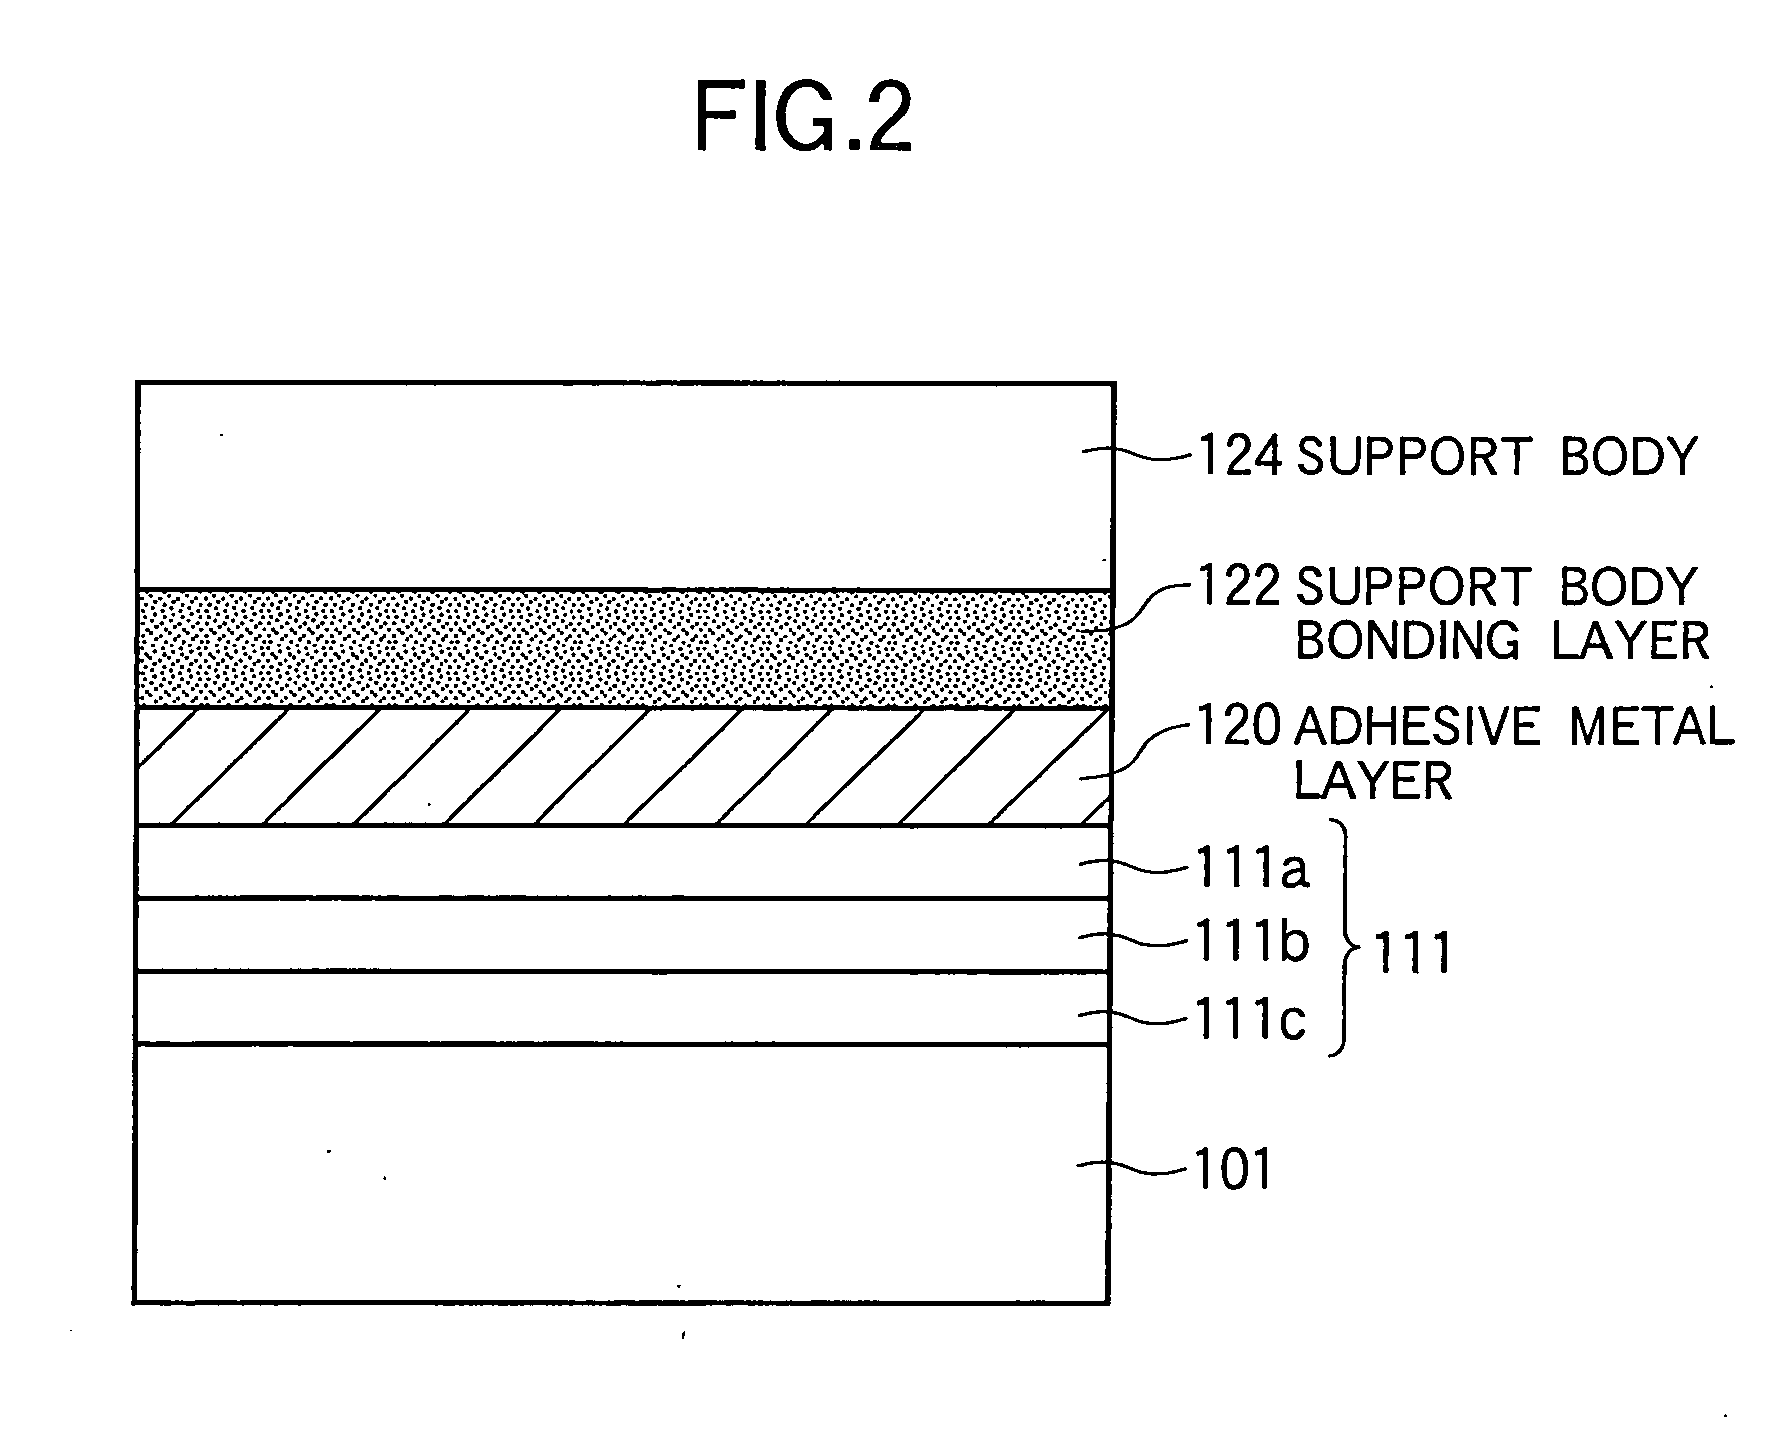 Graphene wafer, method for manufacturing the graphene wafer, method for releasing a graphene layer, and method for manufacturing a graphene device